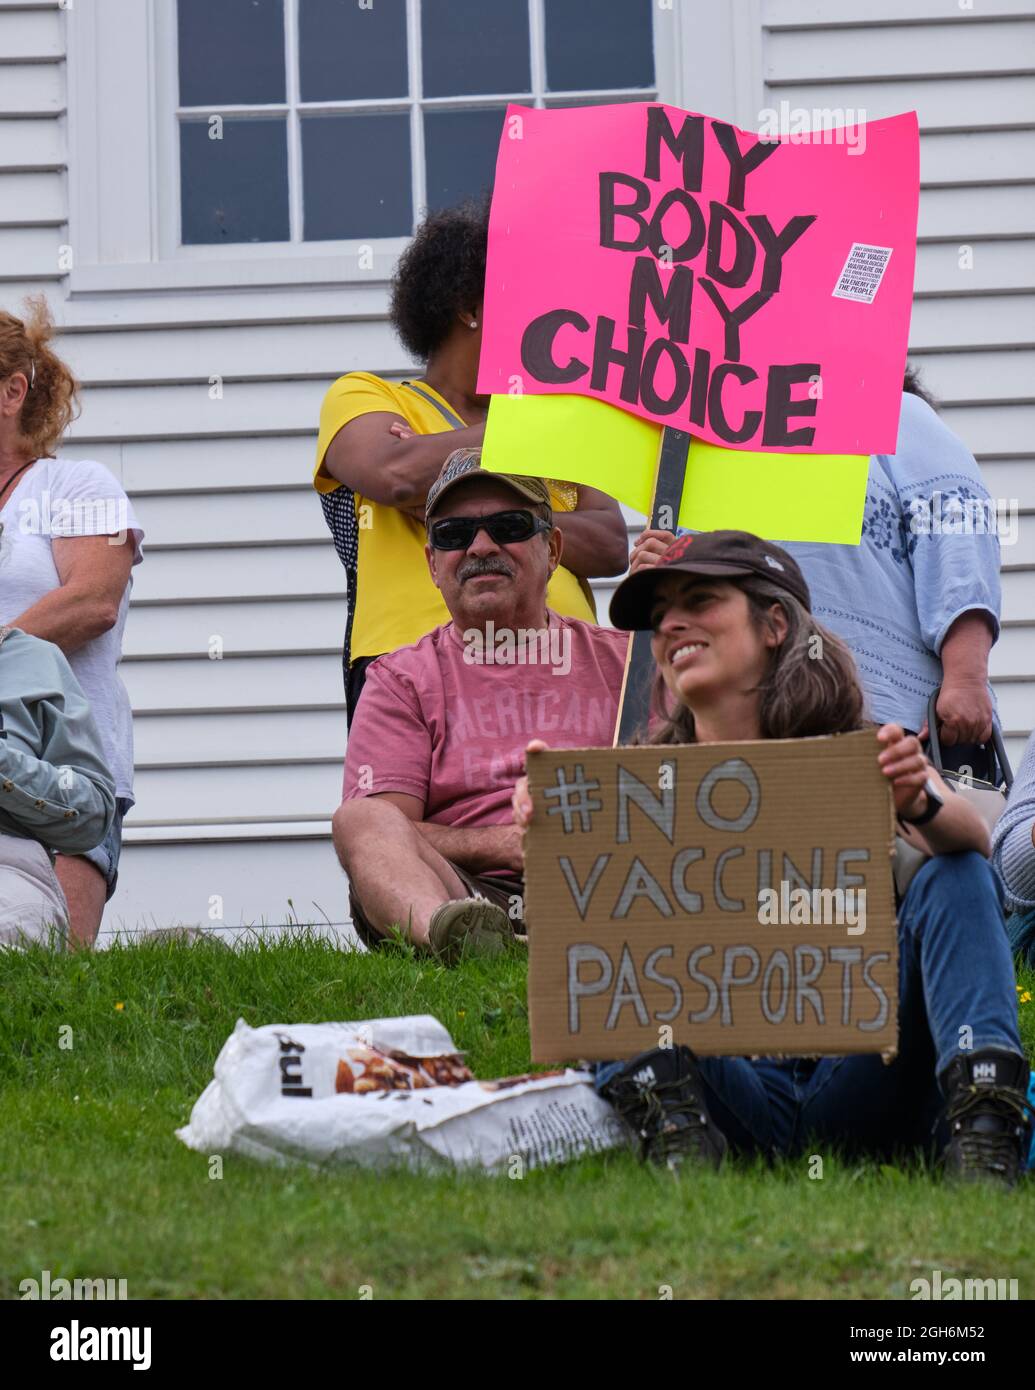 Halifax, Nova Scotia, Canada. September 5th 2021. Male protester holding a 'My body my choice' sign to protest Covid 19 vaccine mandates. A crowd over a few hundreds gathered at the citadel to protest the proposed vaccine mandates to be implemented in Canada as well as other measures link to prevention of the spread of Covid19 as Canada enters its 4th wave of the pandemic. Stock Photo